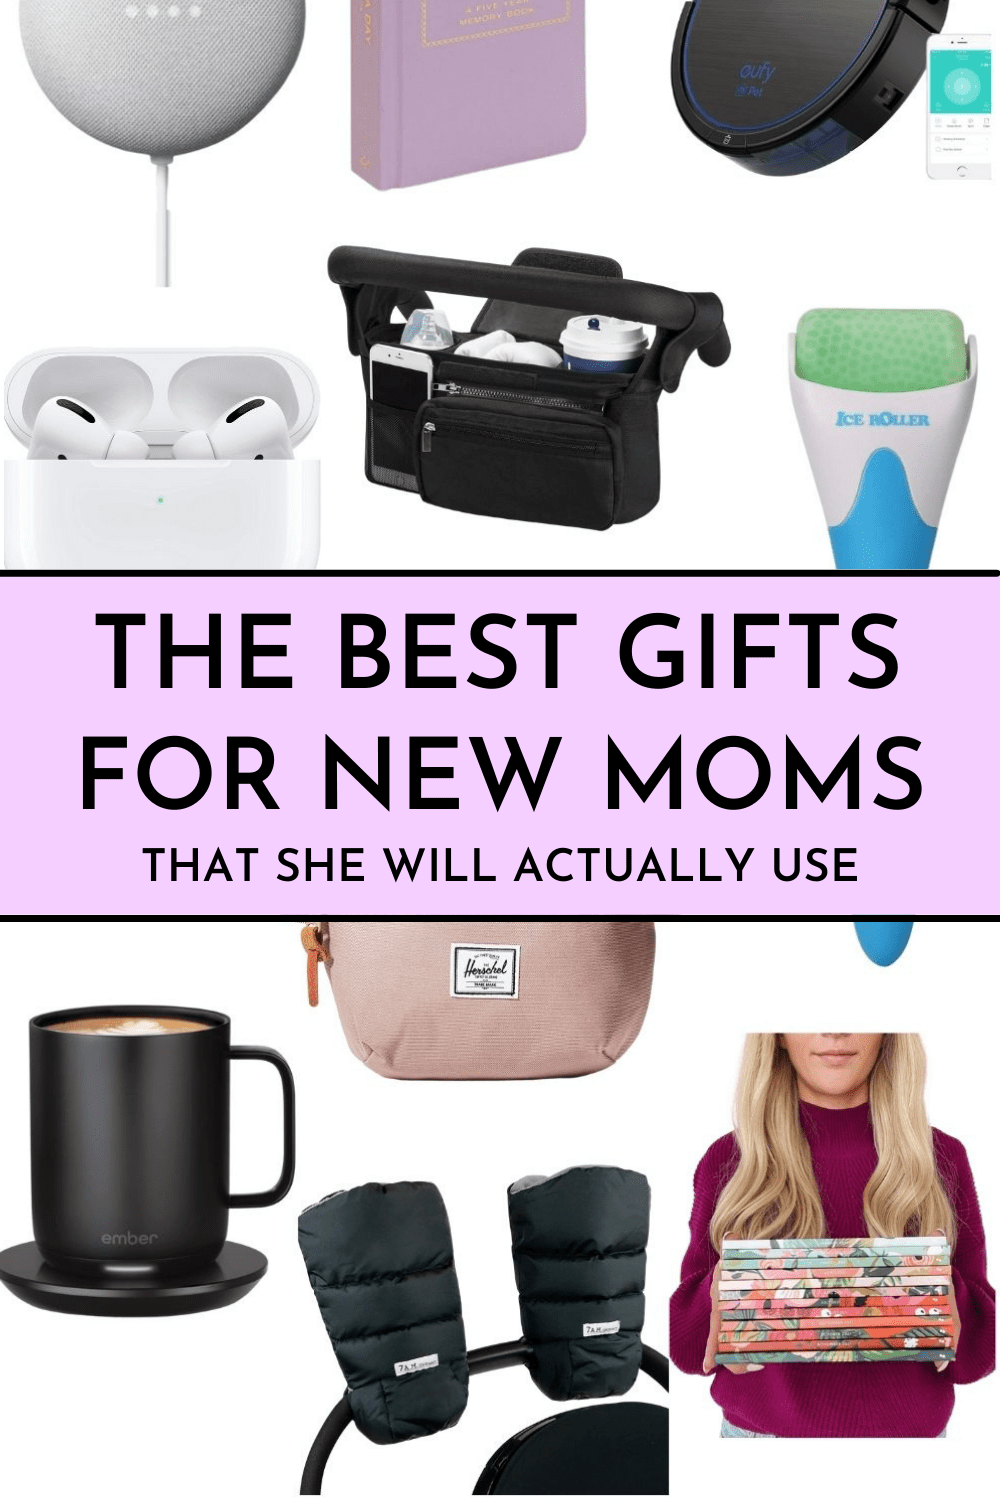 https://www.hellospoonful.com/wp-content/uploads/2021/11/Best-Gifts-For-New-Moms.png